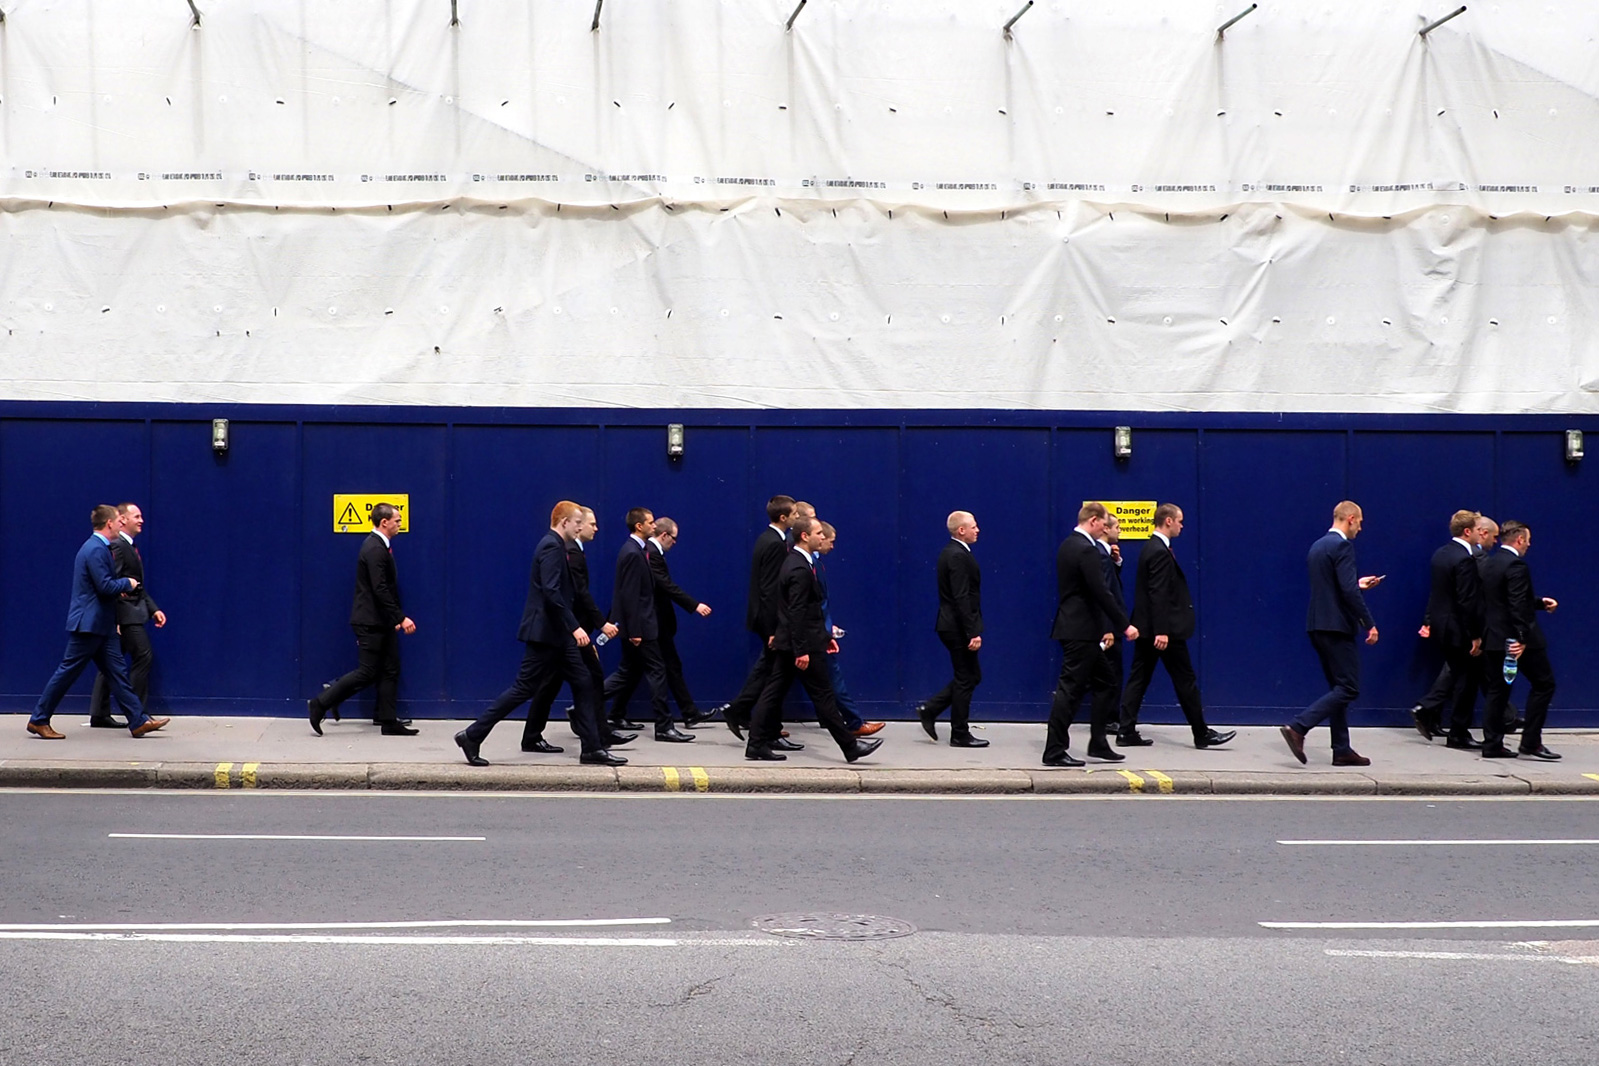 A group of men in business suits walking together